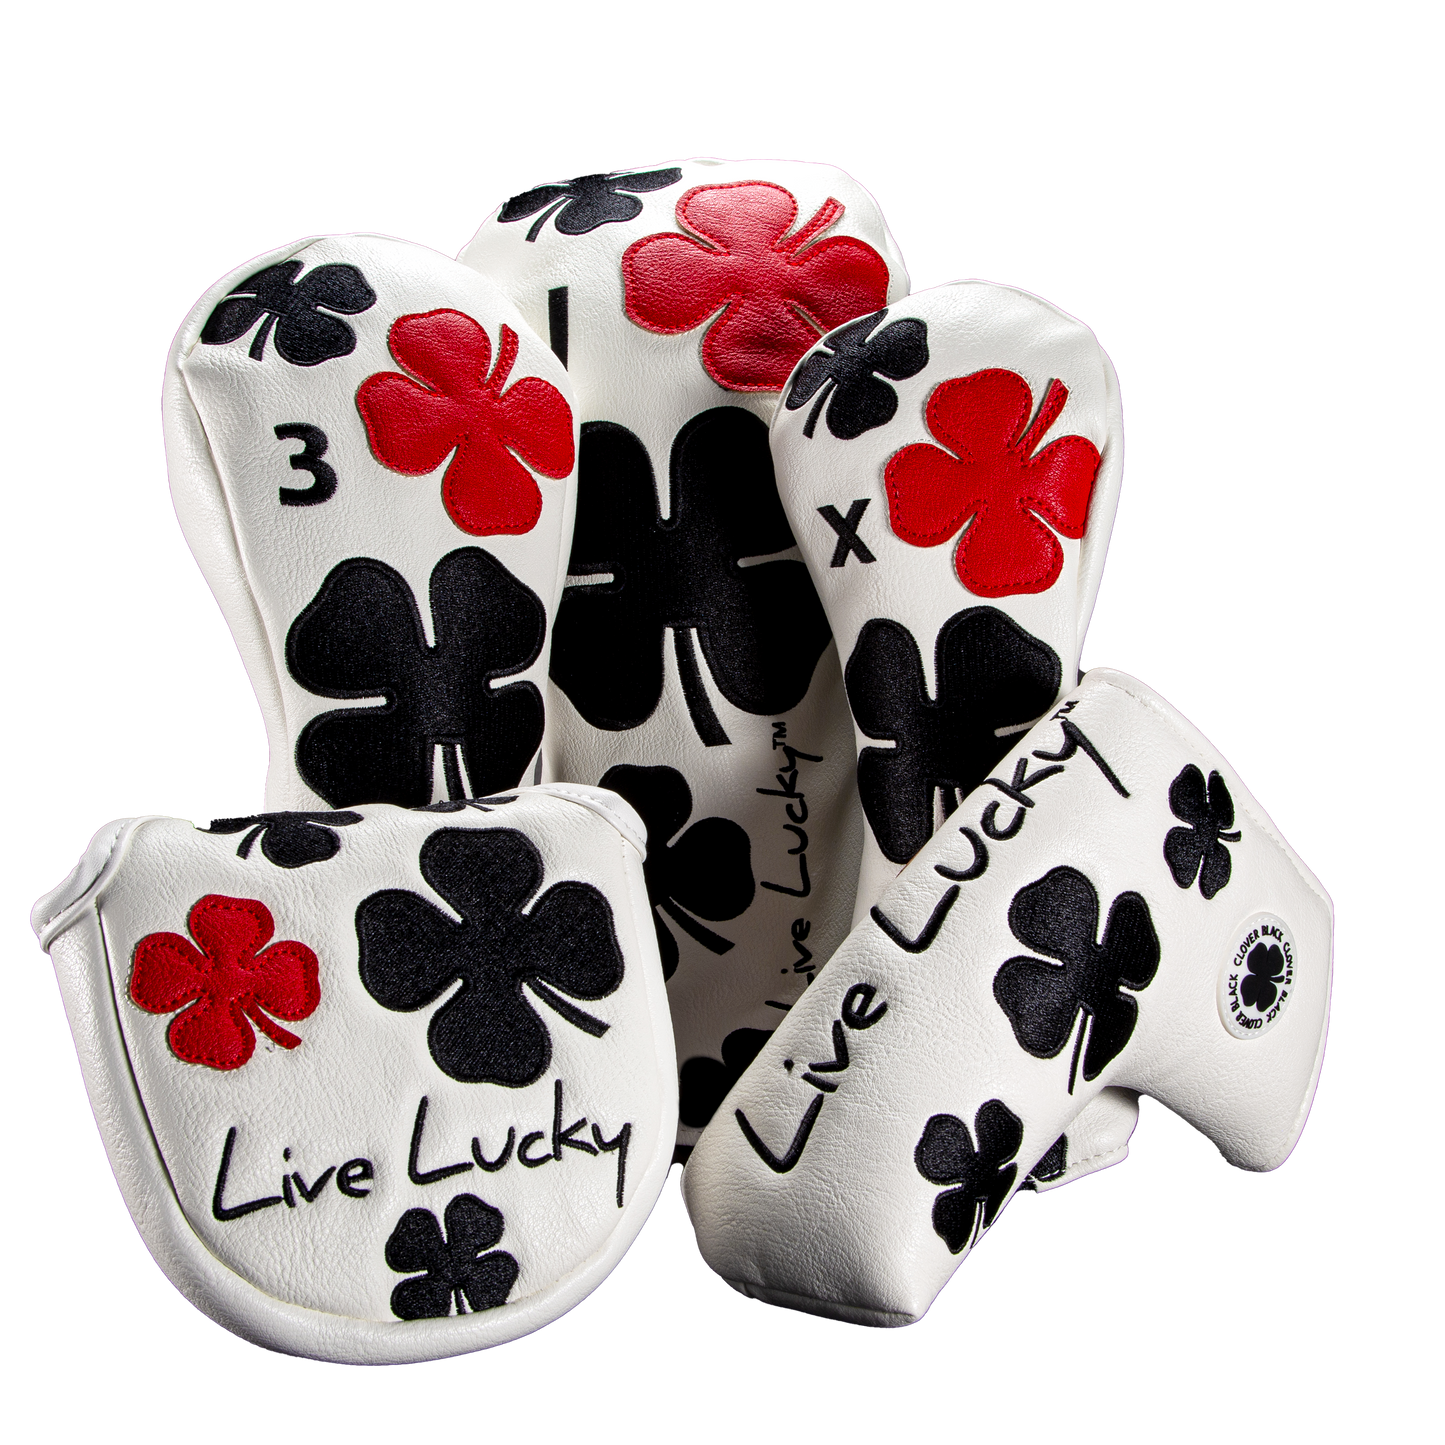 Live Lucky "Poker" Collection